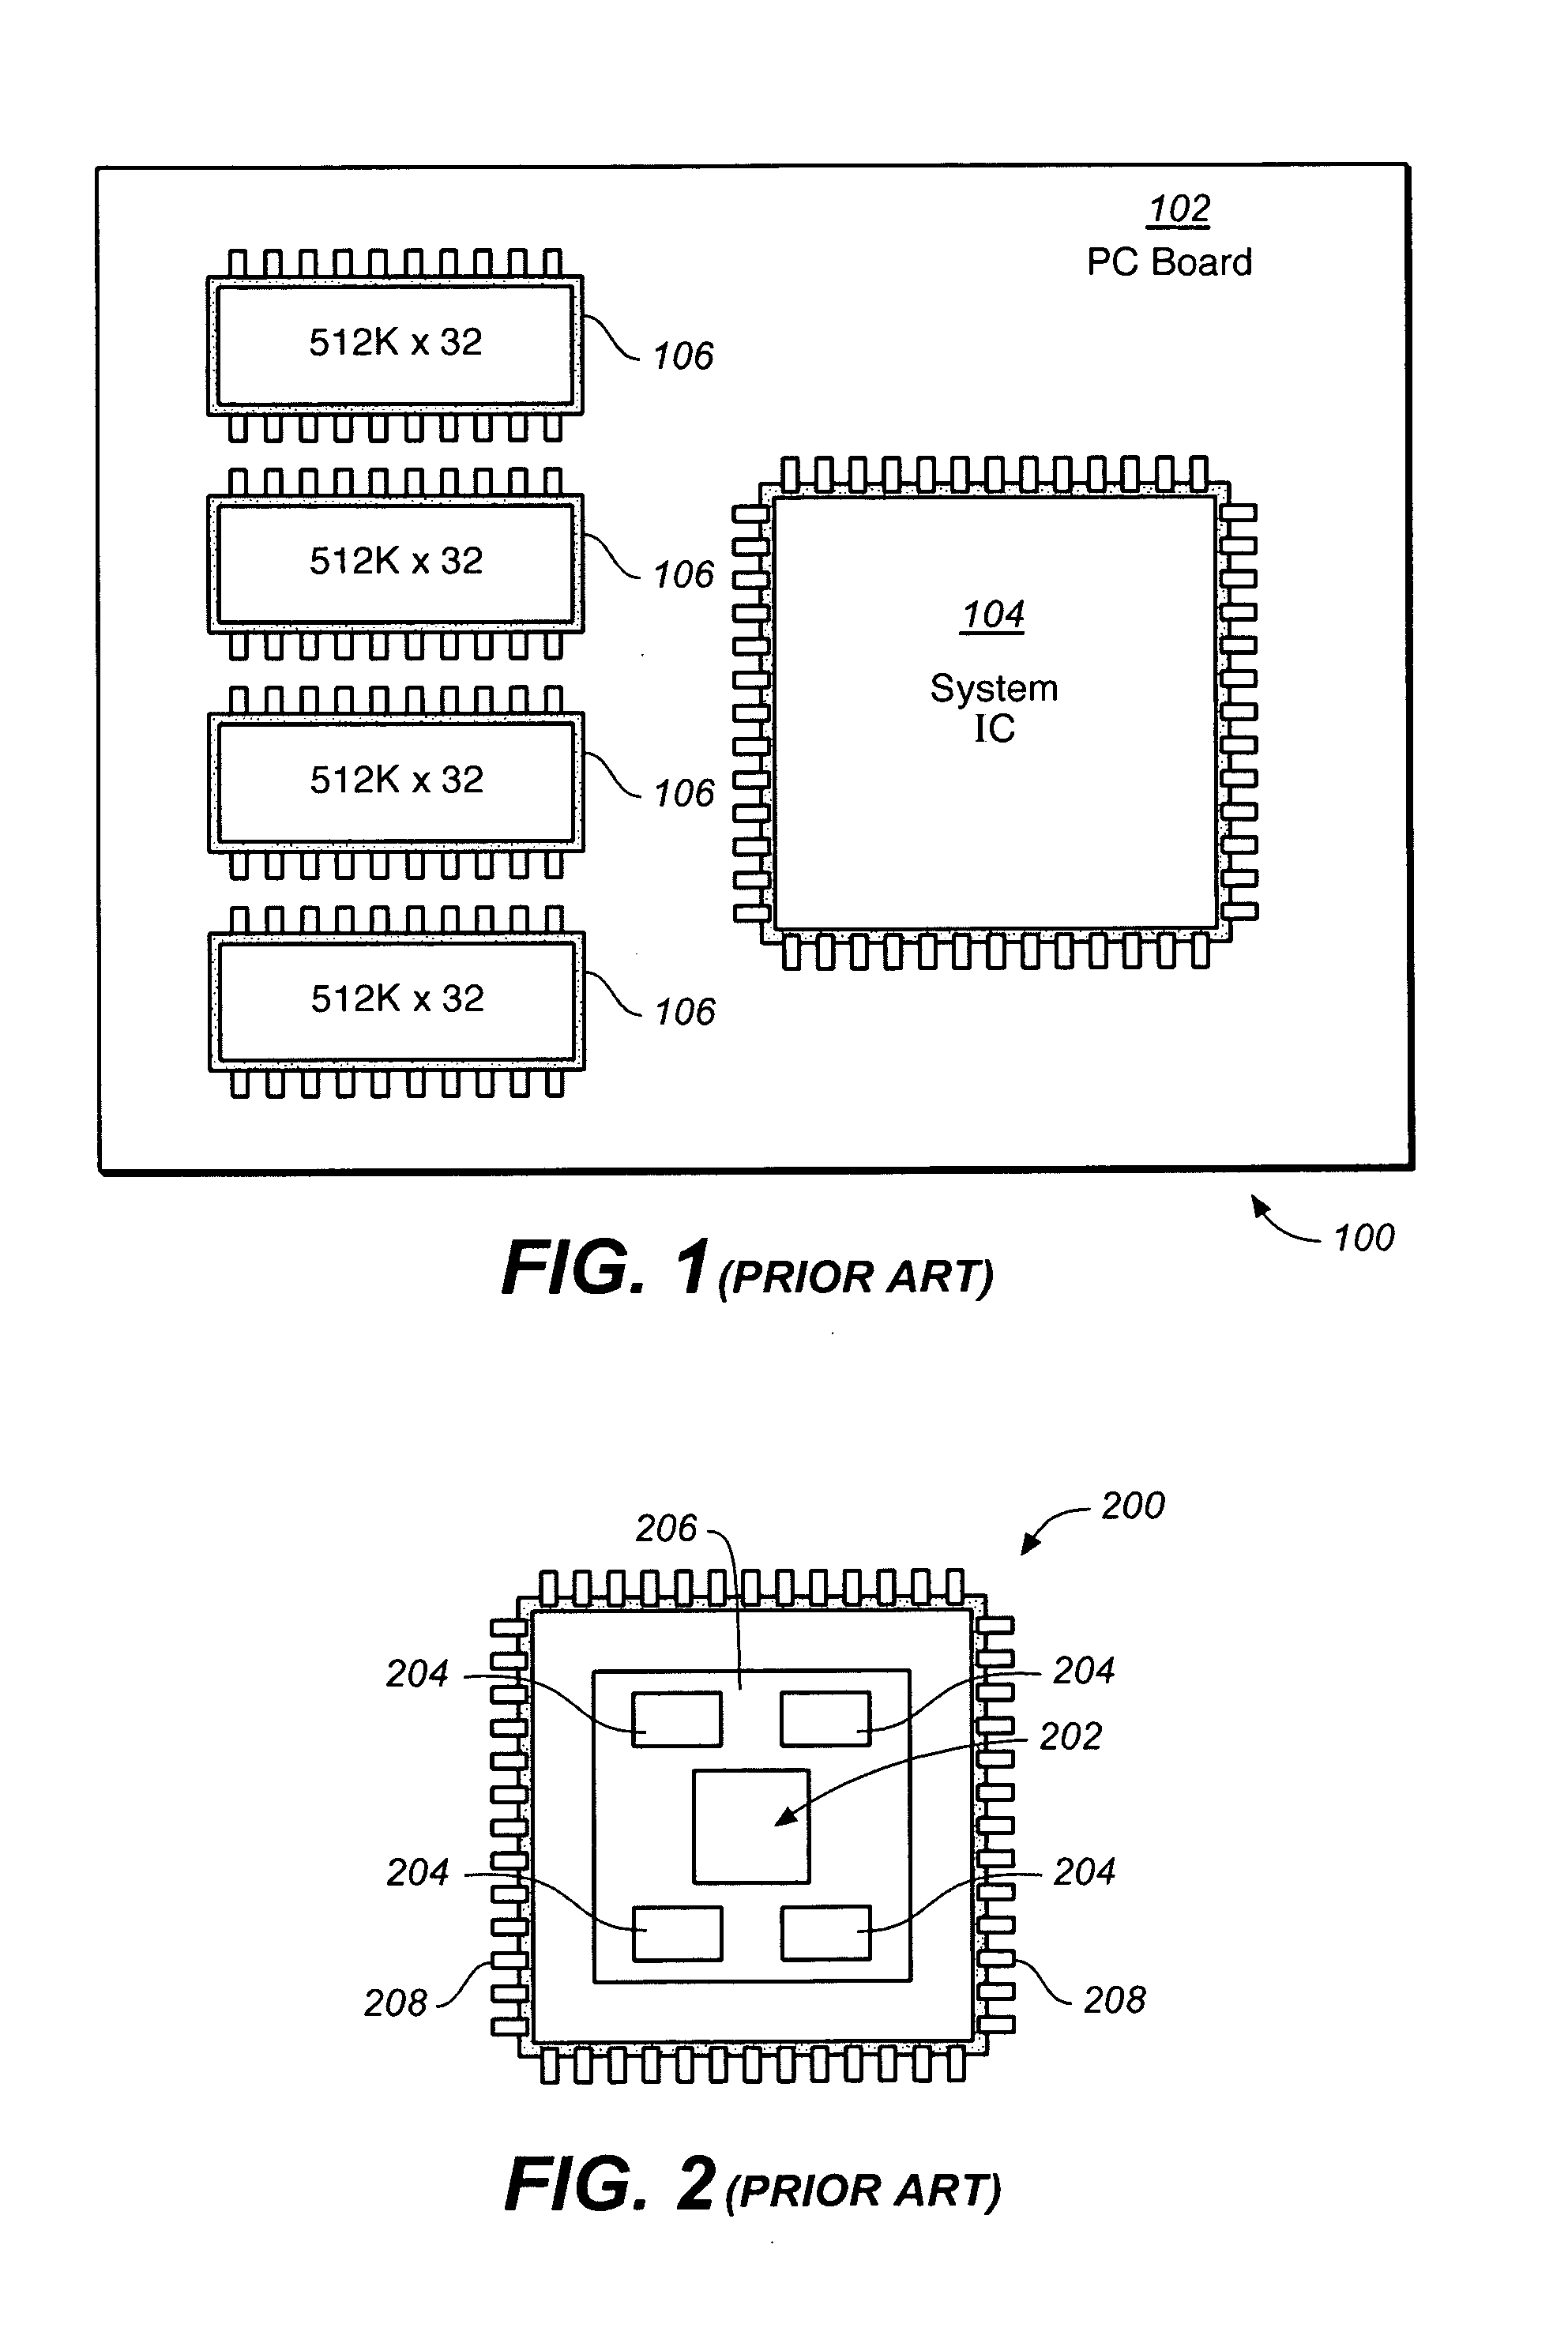 Chip testing within a multi-chip semiconductor package